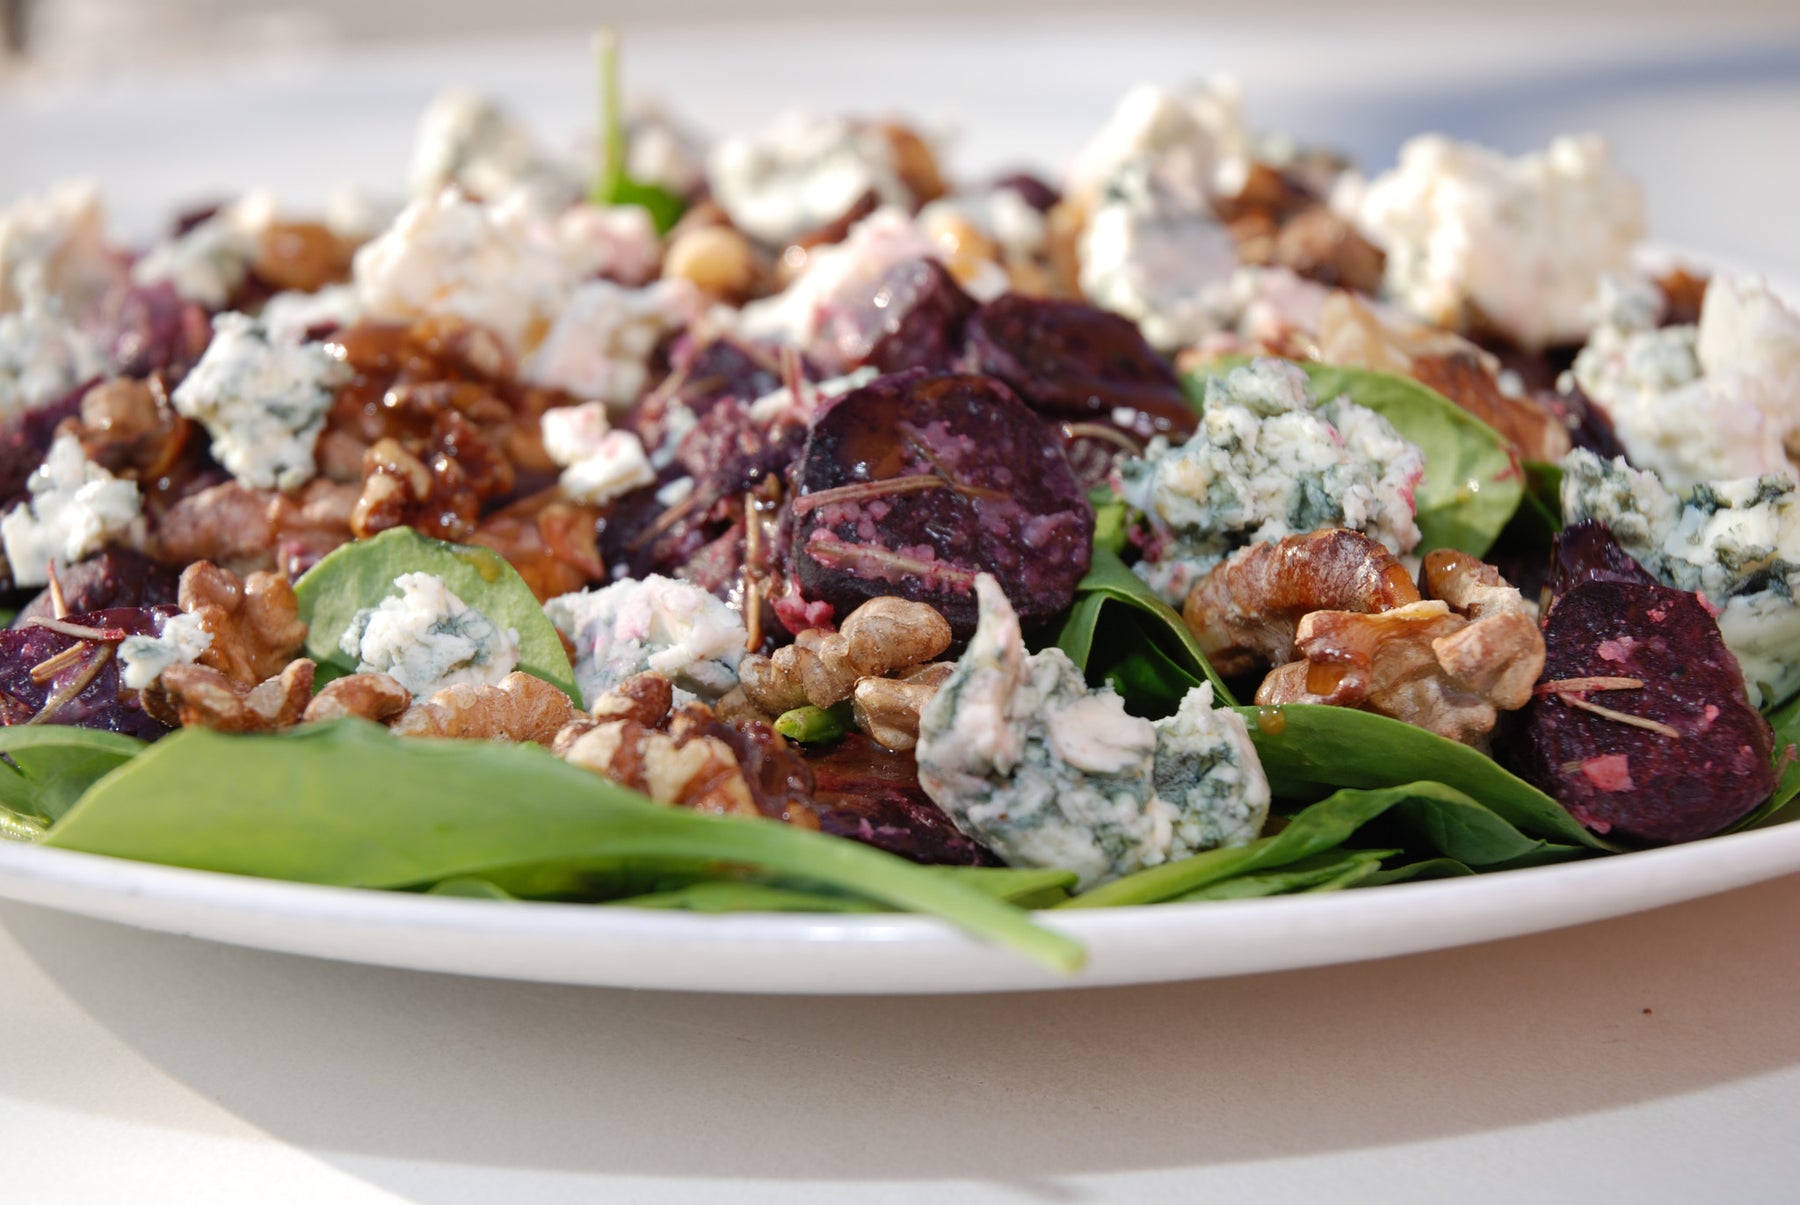 Roasted Beet and Blue Cheese Salad with Balsamic Dressing